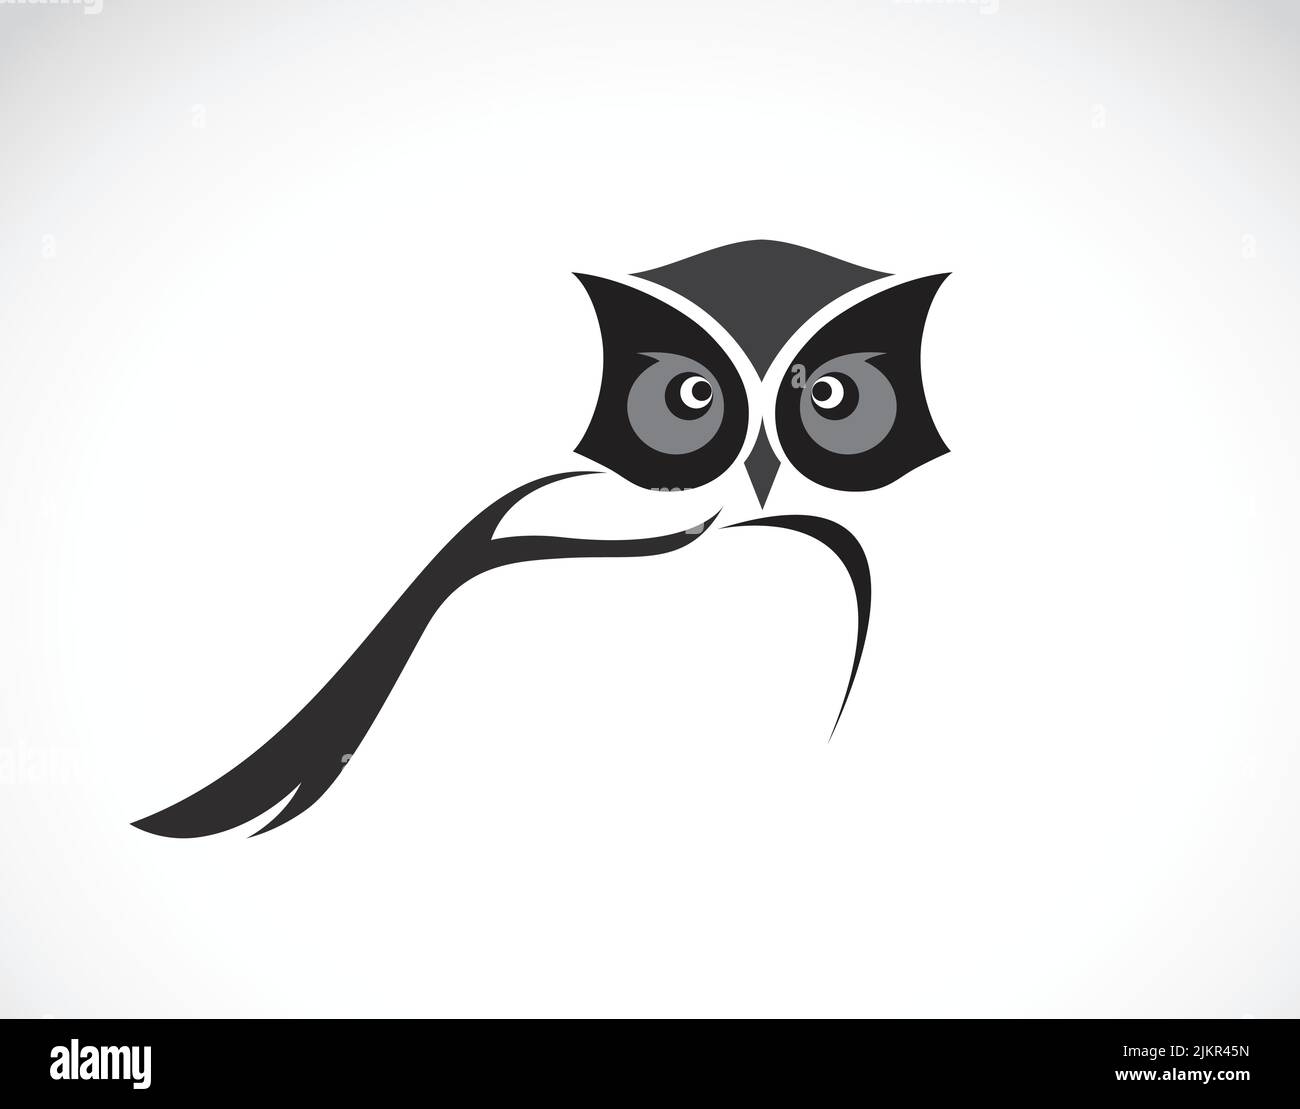 Vector image of an owl design on white background. Stock Vector